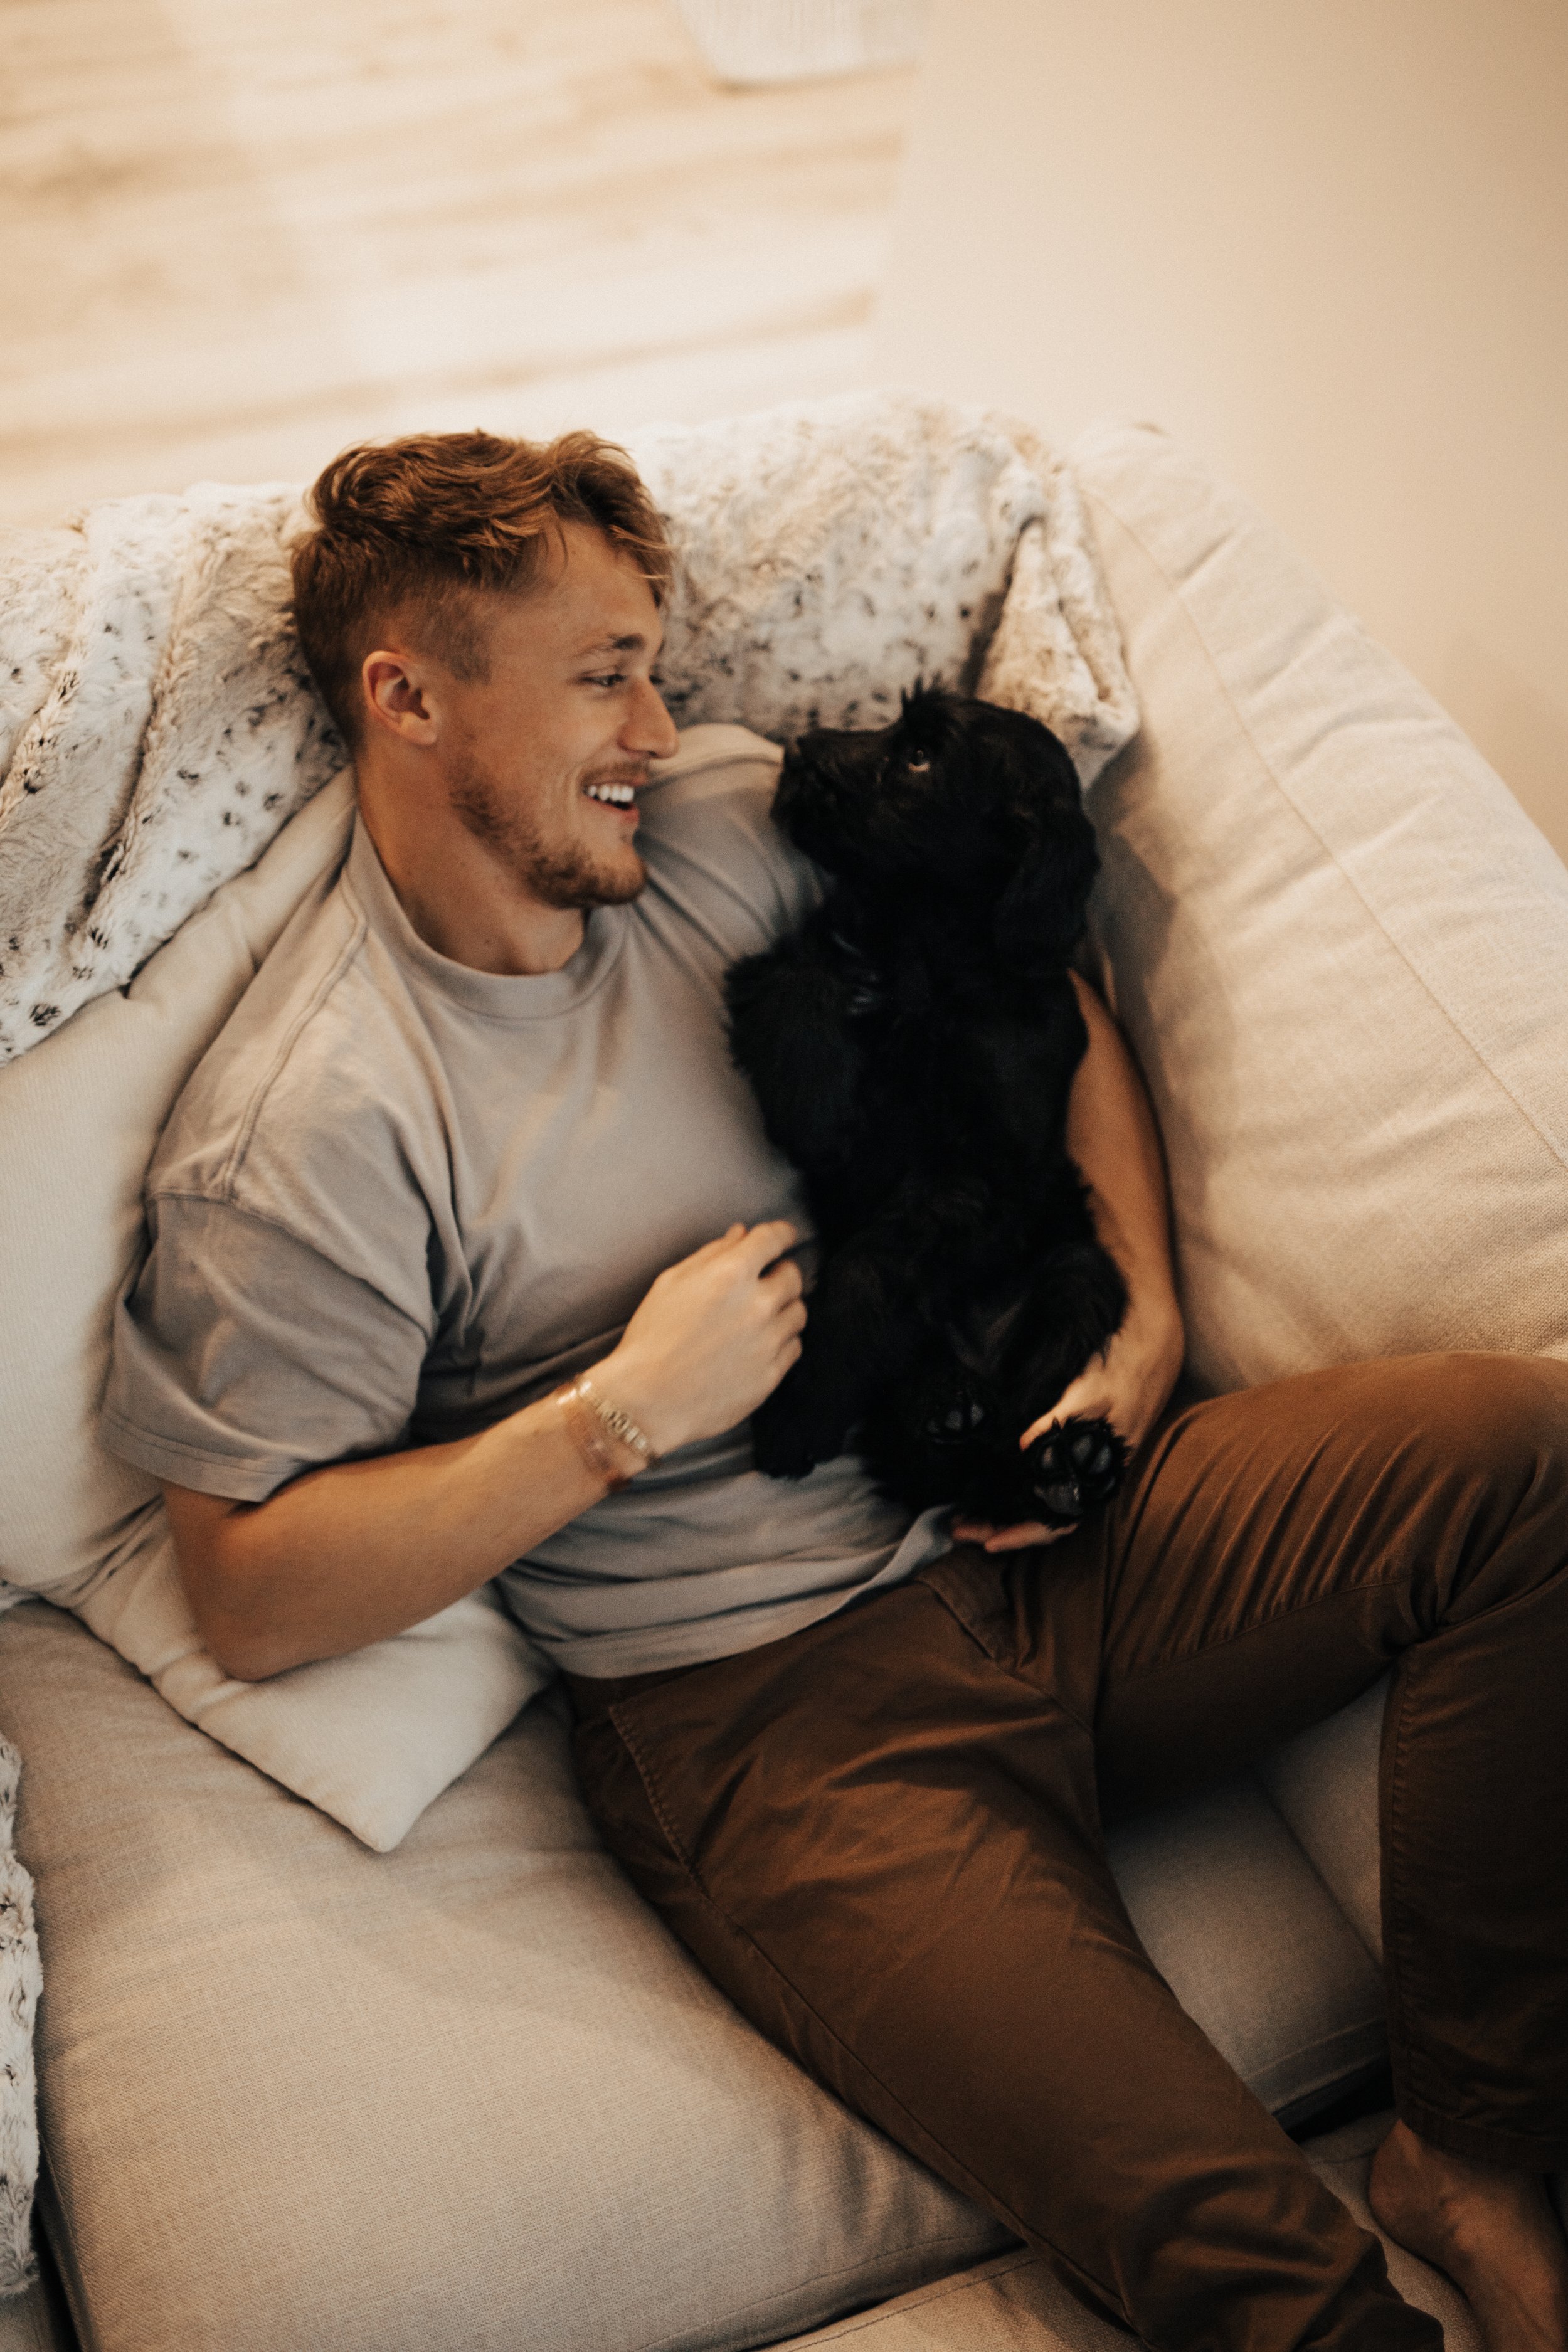 in-home-couples-shoot-with-dog-12.jpg